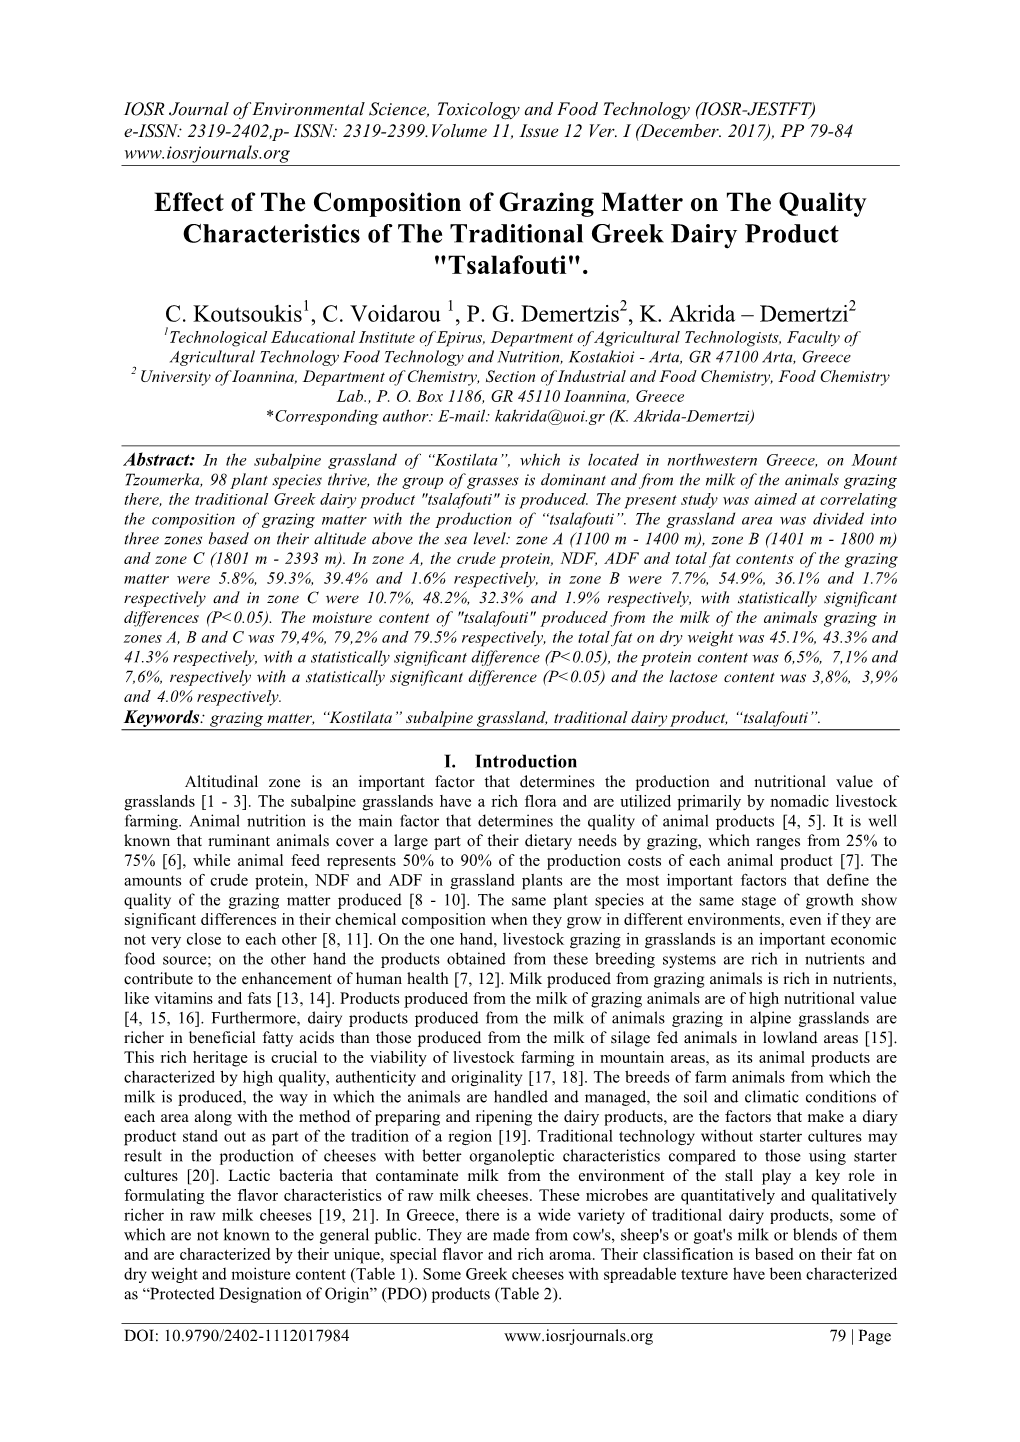 Effect of the Composition of Grazing Matter on the Quality Characteristics of the Traditional Greek Dairy Product "Tsalafouti"